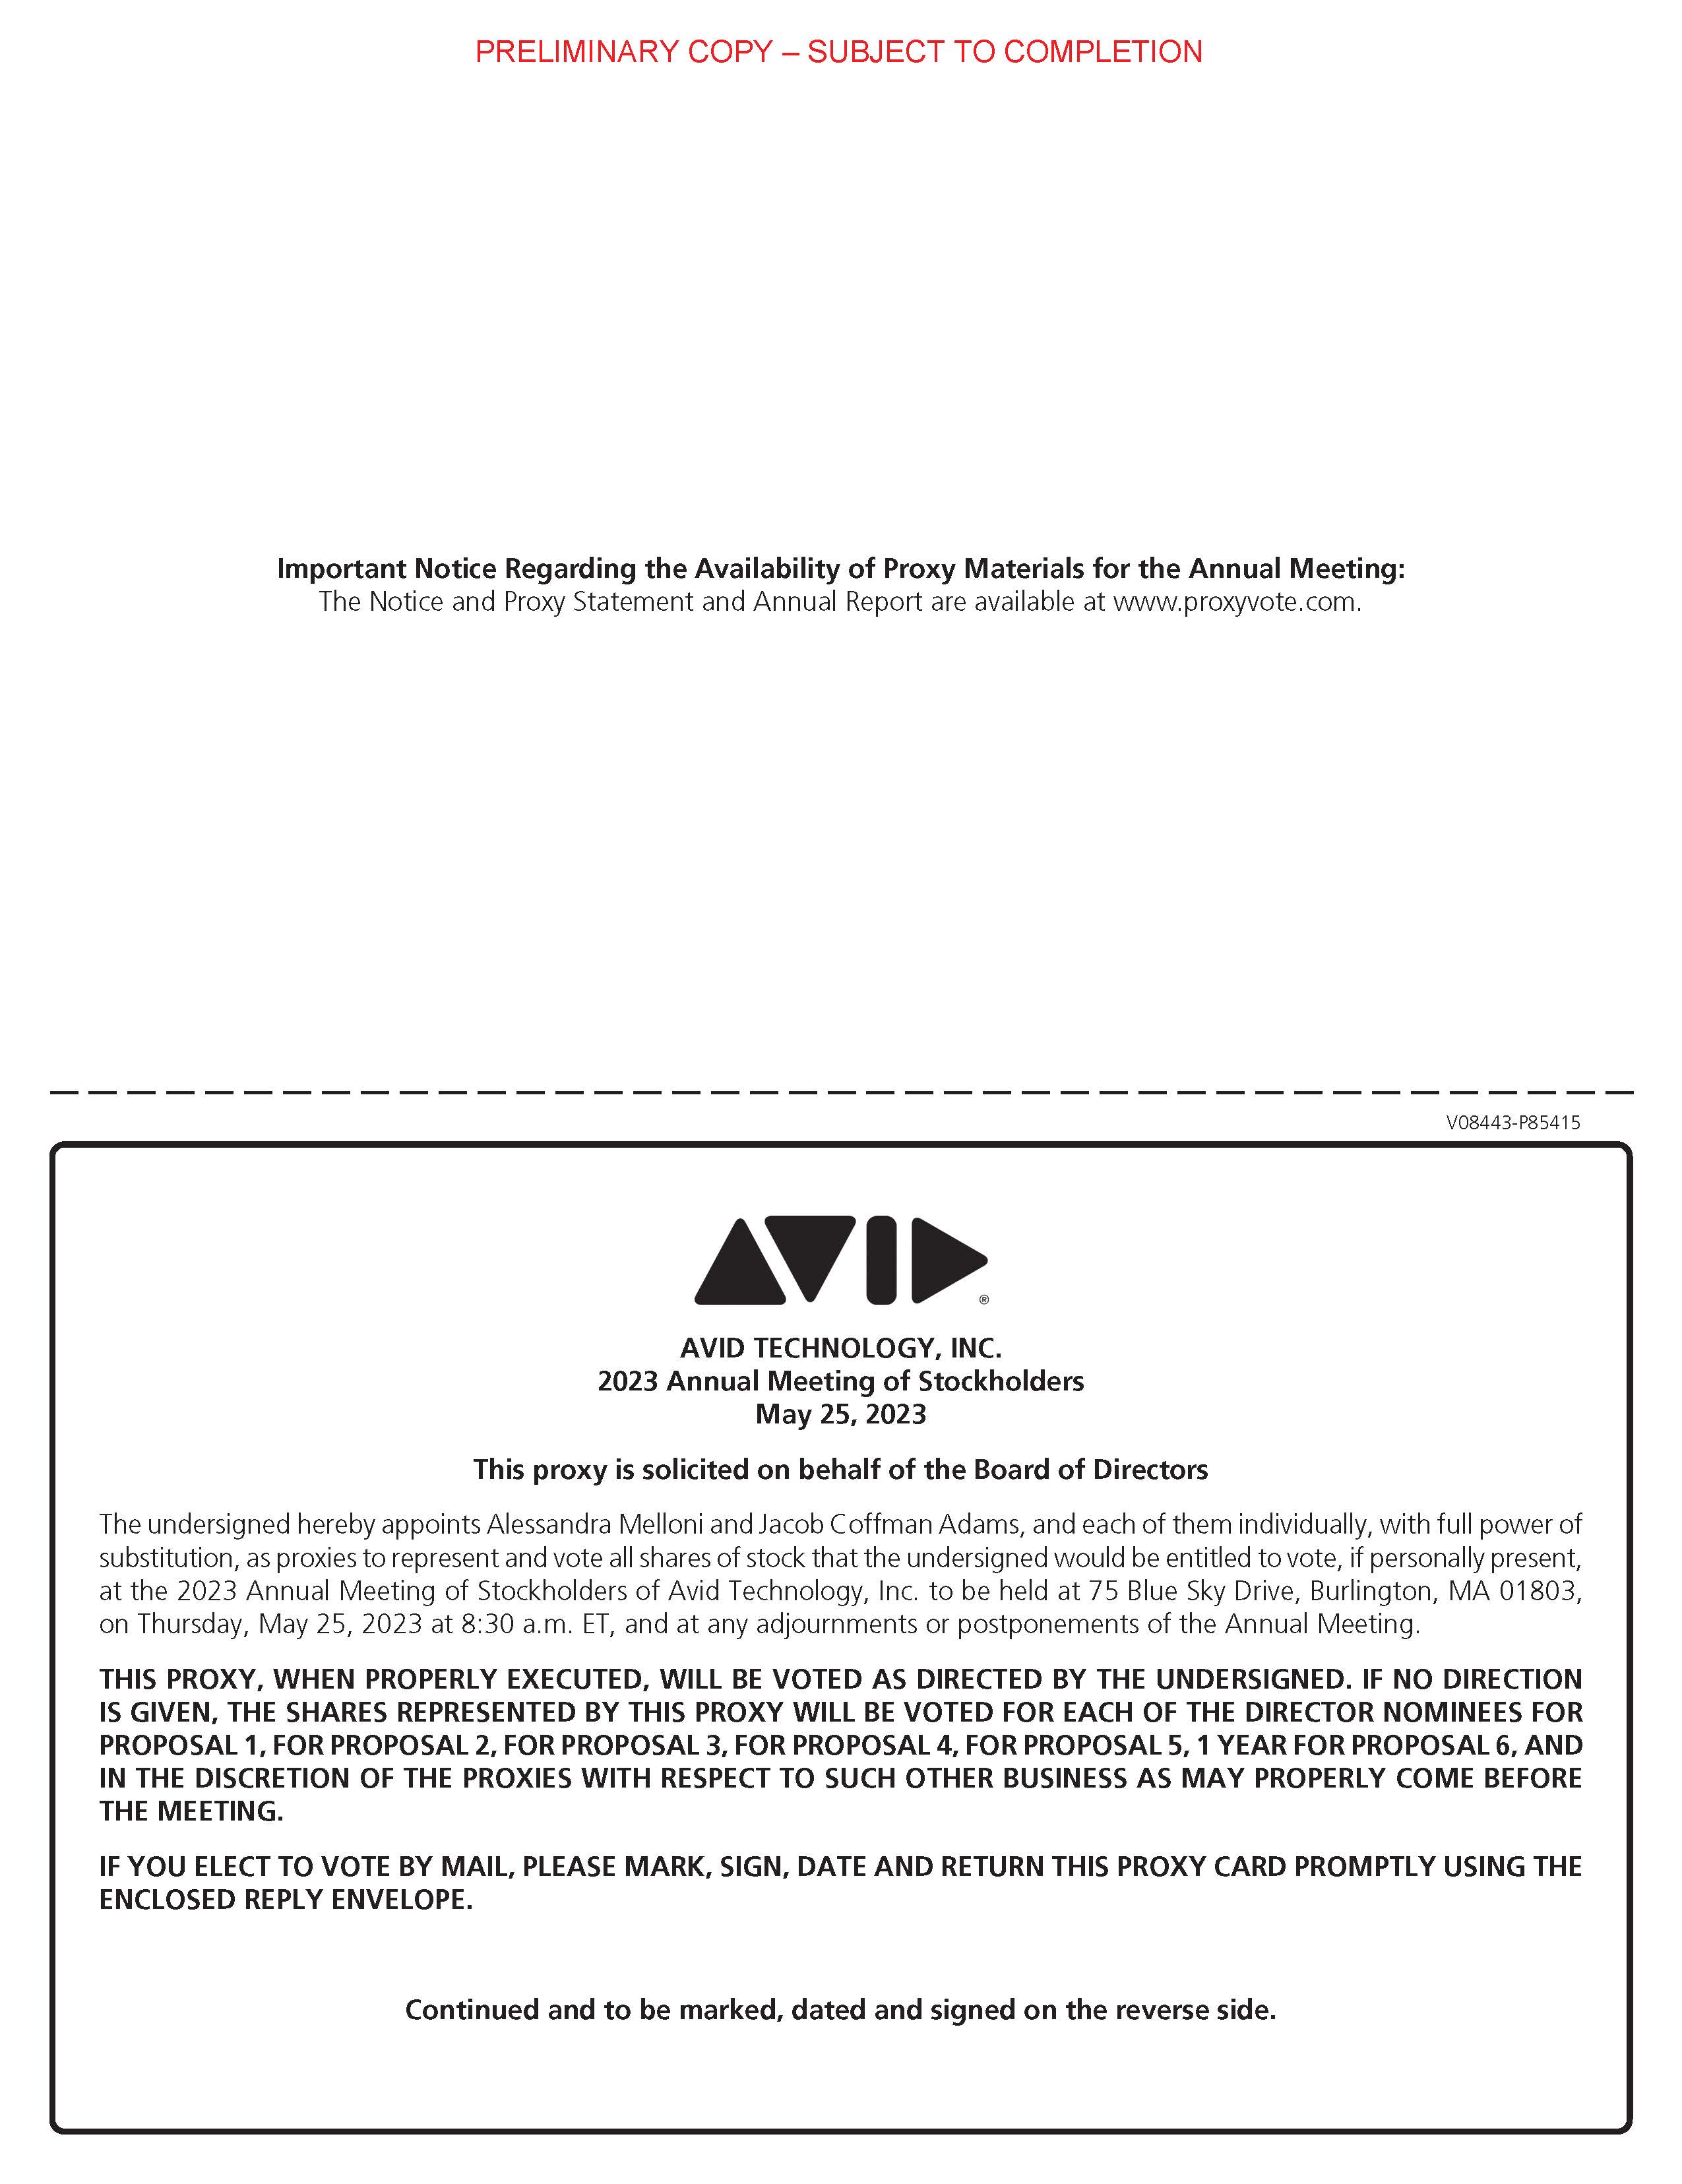 AVID TECHNOLOGY, INC. - 2023 Proxy Card with Prelim Legend_Page_2.jpg